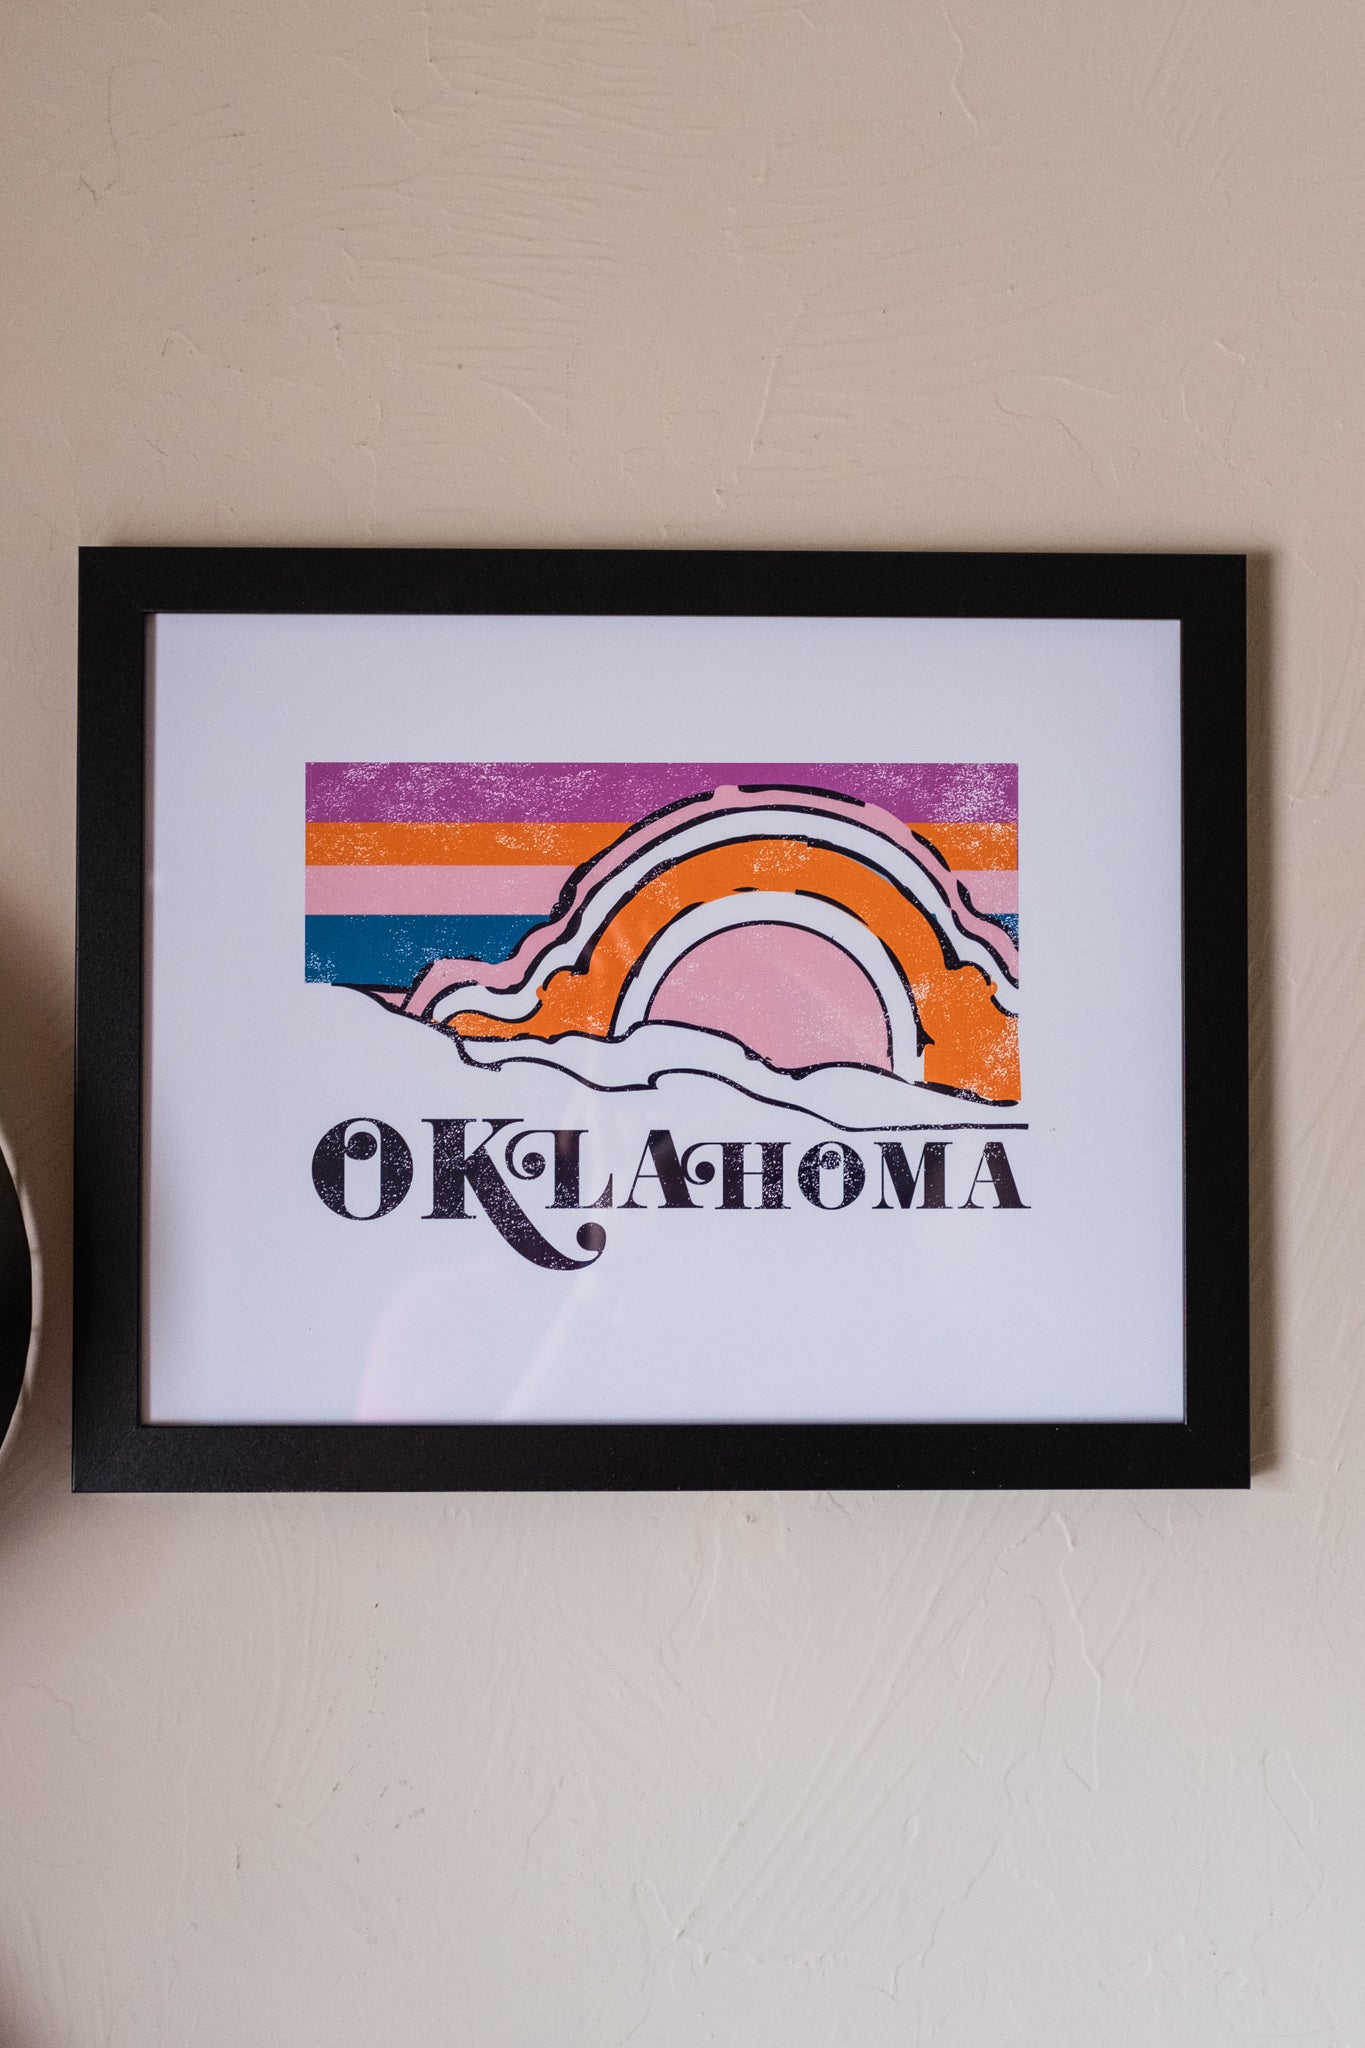 OK sunset print 11 X 14 (unframed) - Trendy Gifts at Lush Fashion Lounge Boutique in Oklahoma City